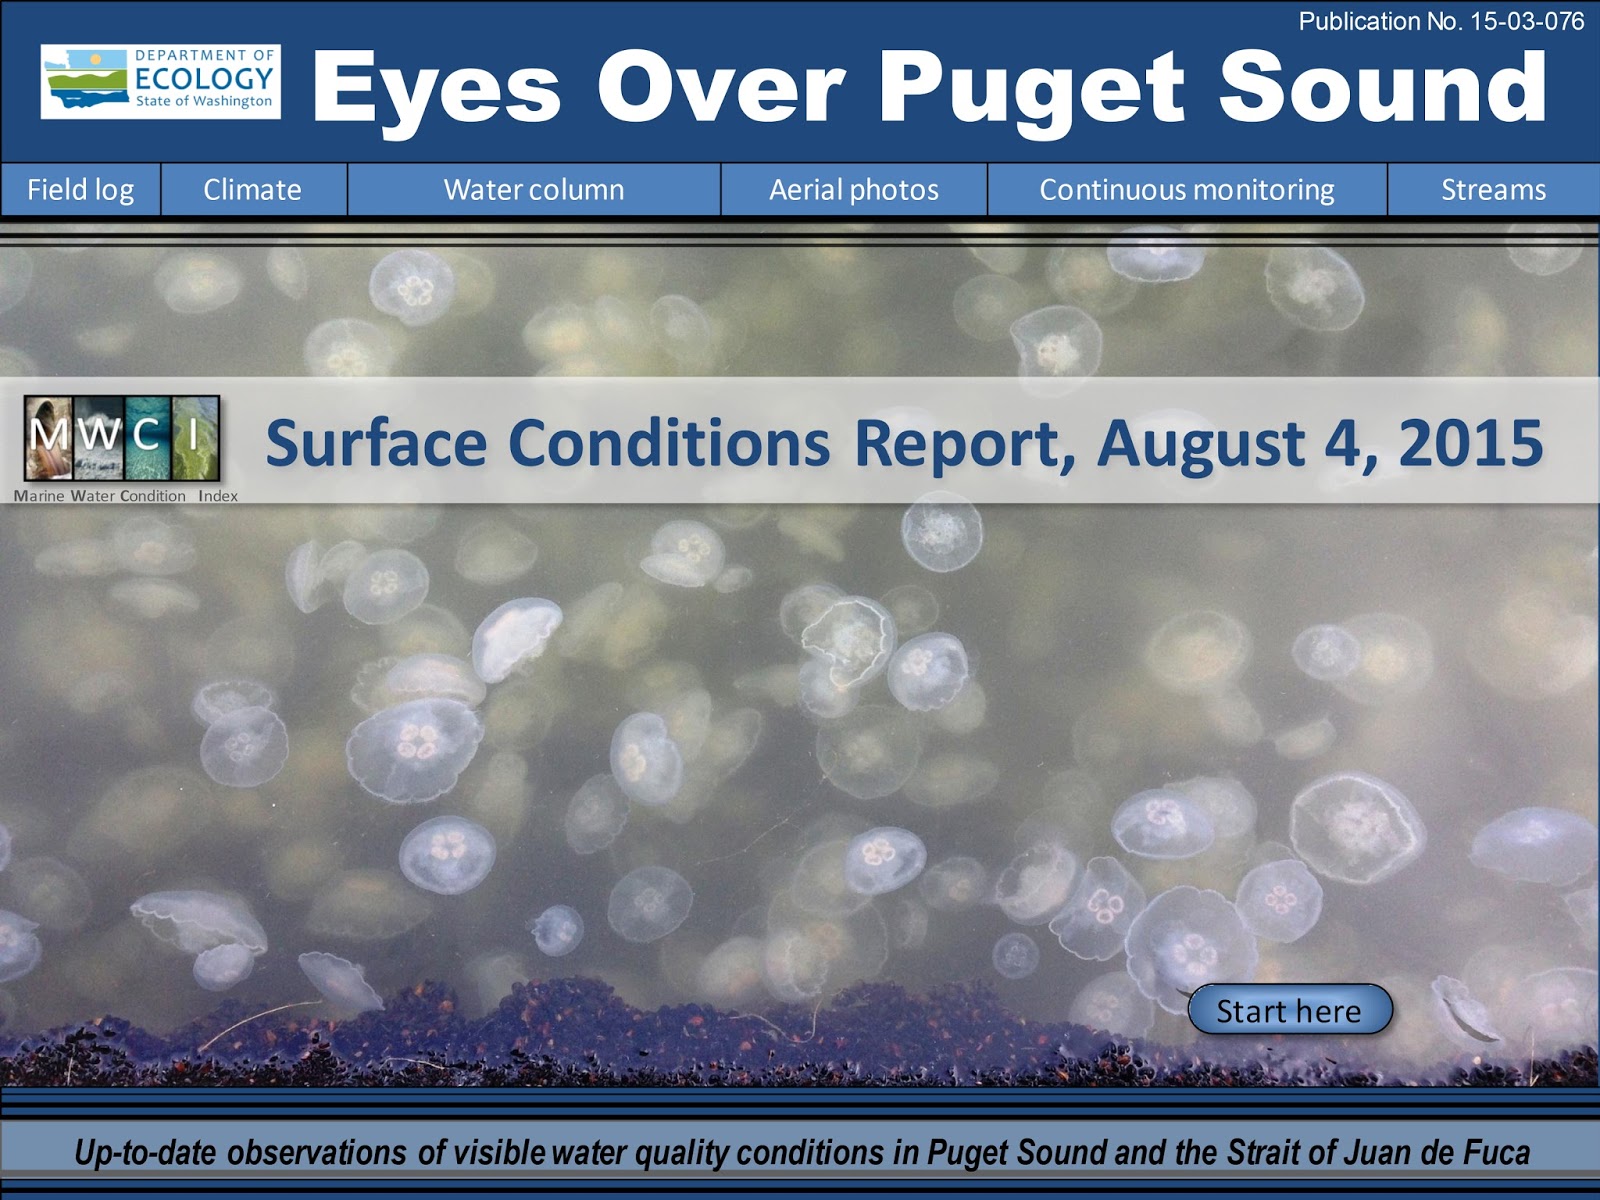 Front cover of Eyes Over Puget Sound shows many, many jellyfish swimming, viewed from underwater.